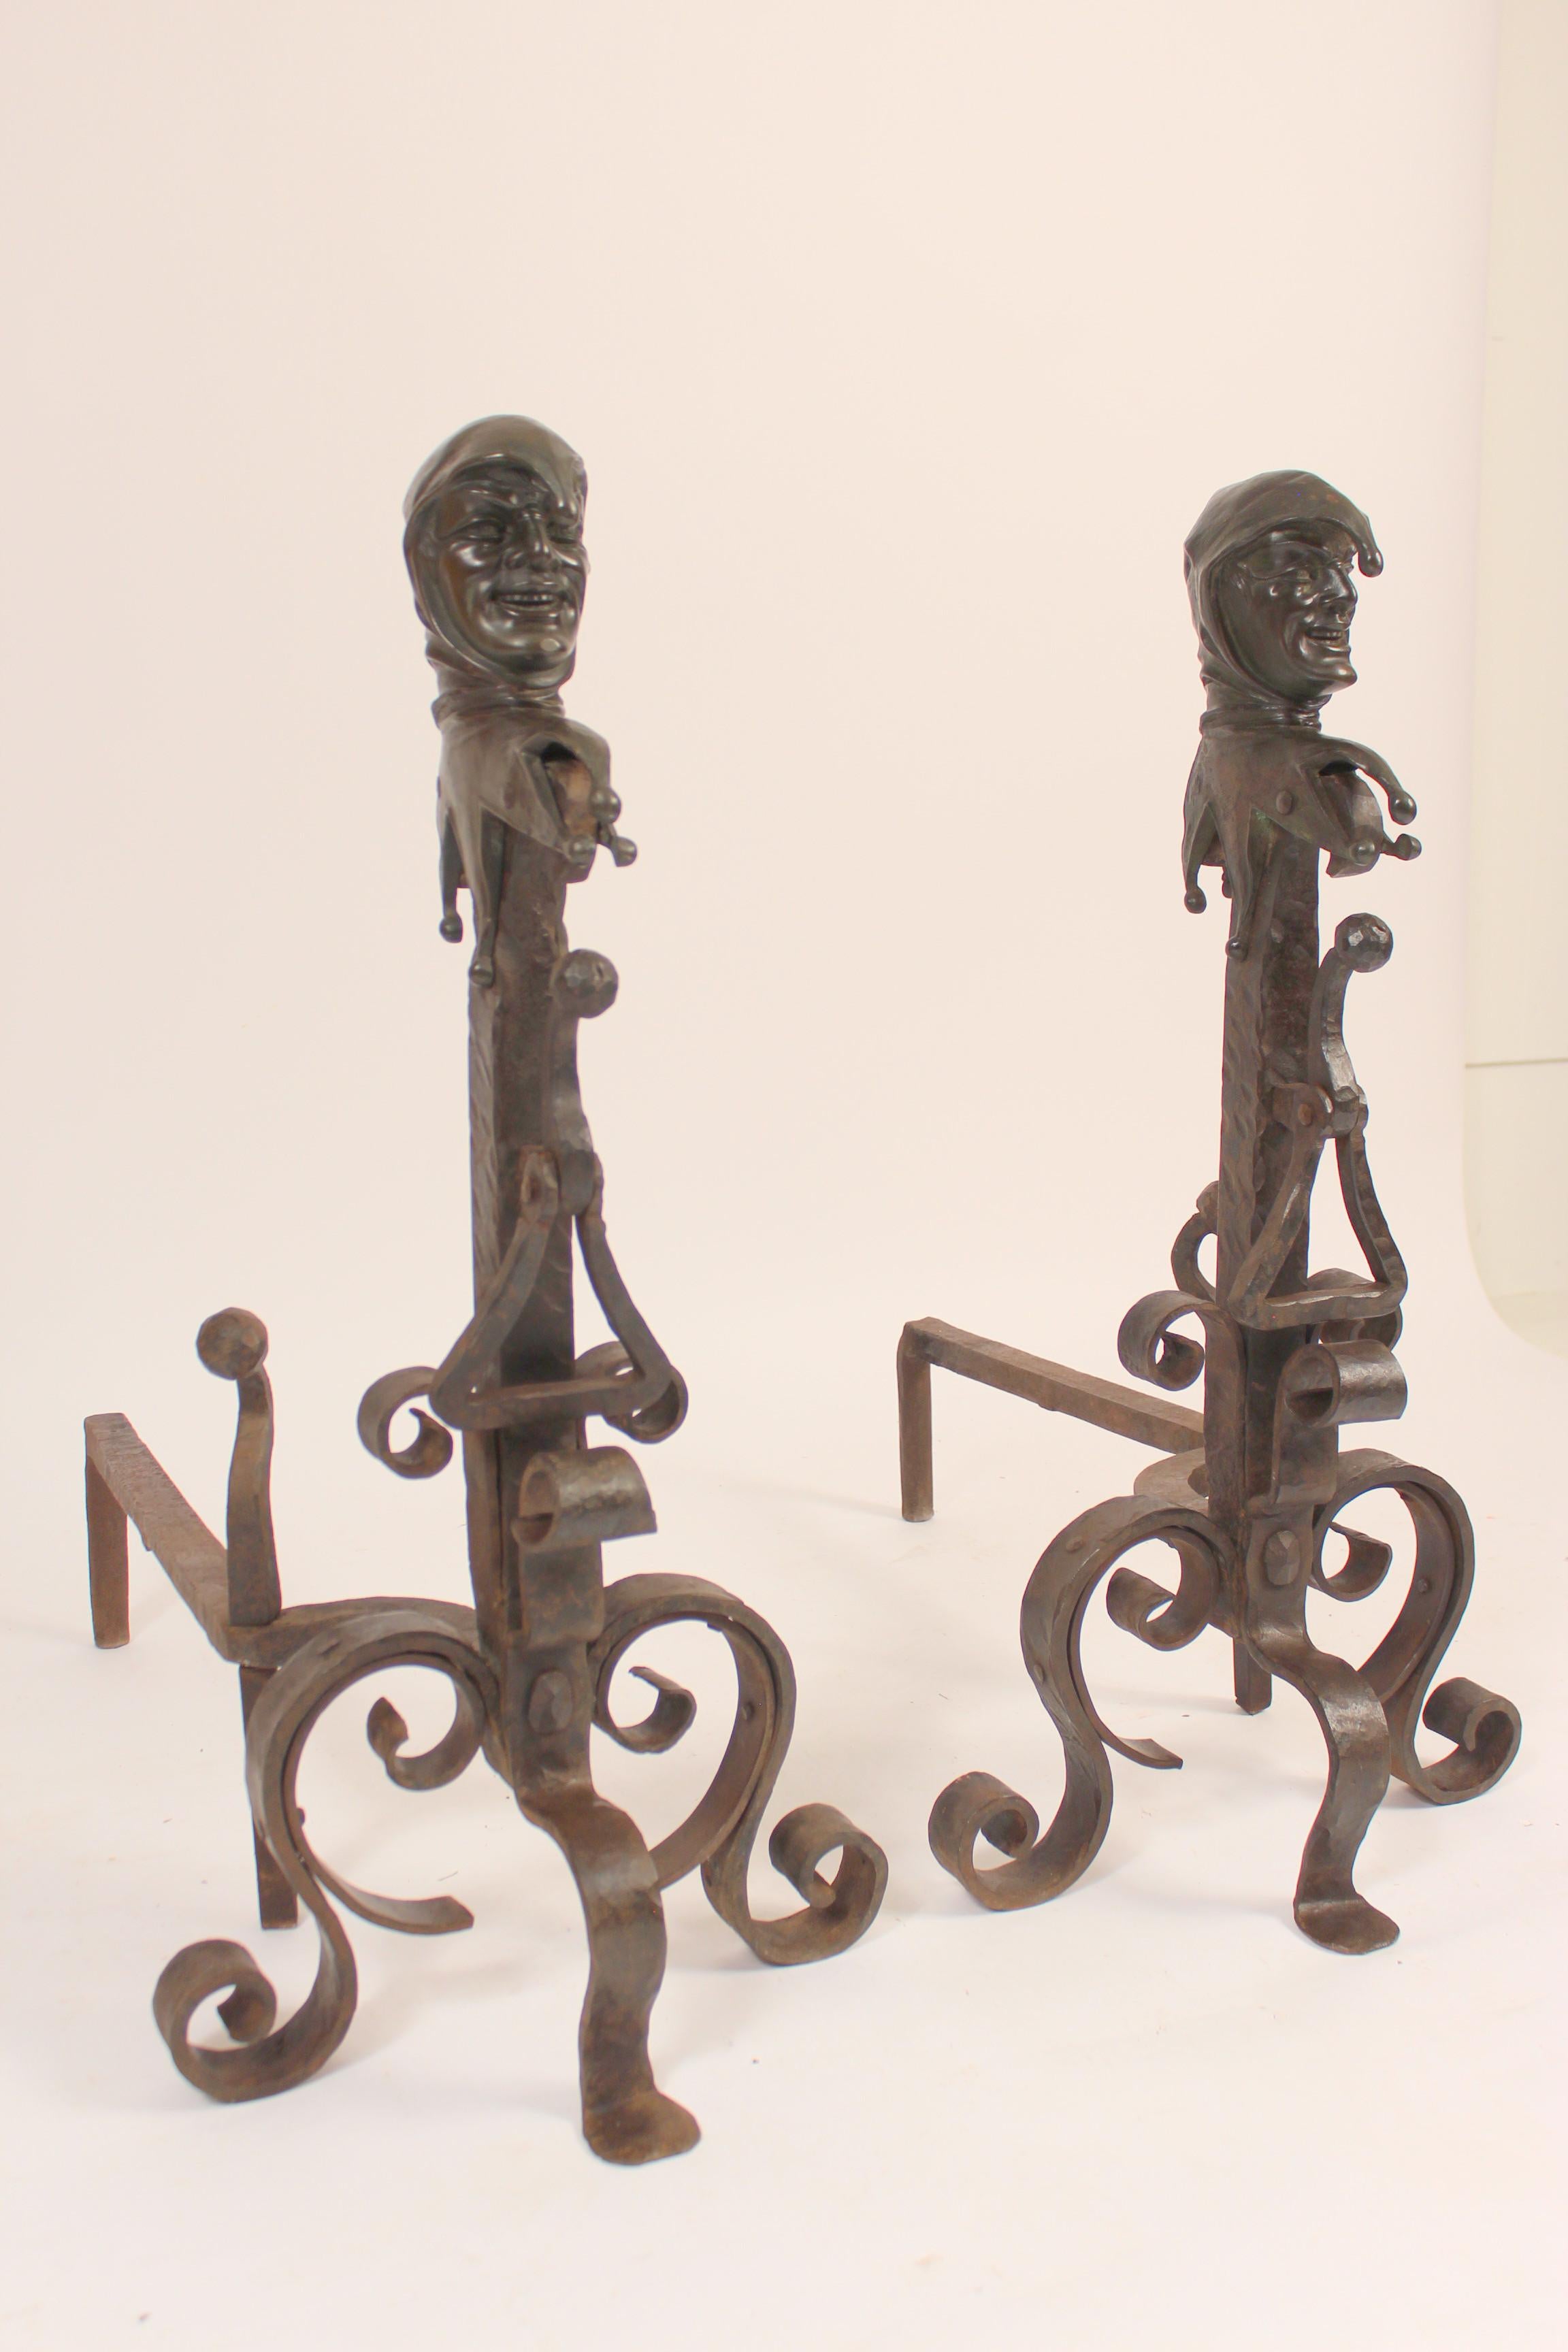 Pair of wrought iron and bronze andirons with bronze jester faces, circa 1920s. The jester faces are bronze and the rest of the andirons are wrought iron.